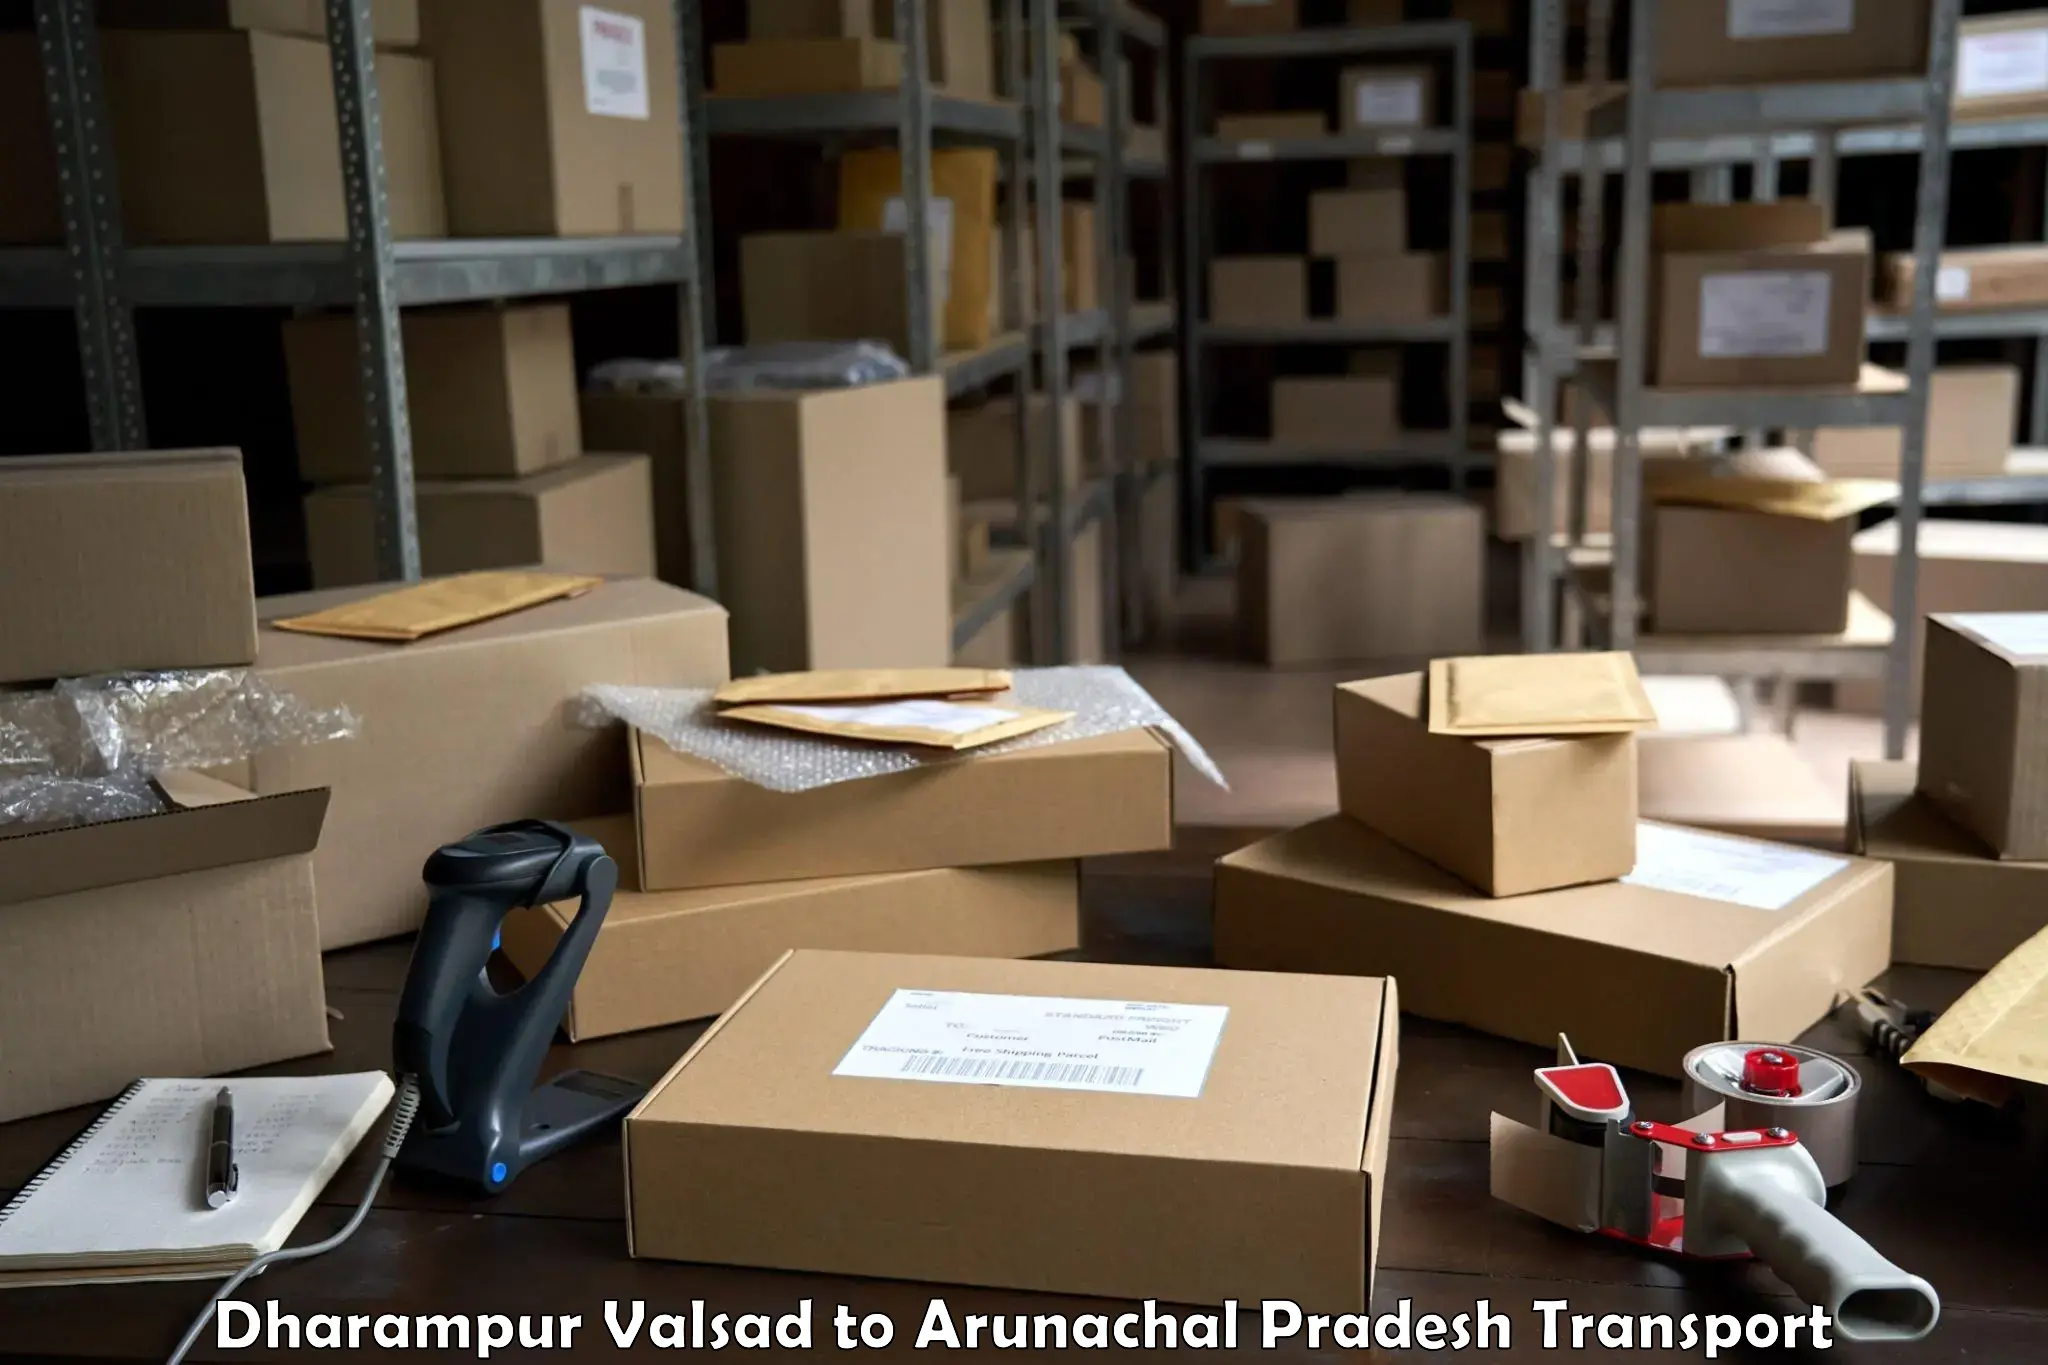 Vehicle parcel service Dharampur Valsad to Deomali